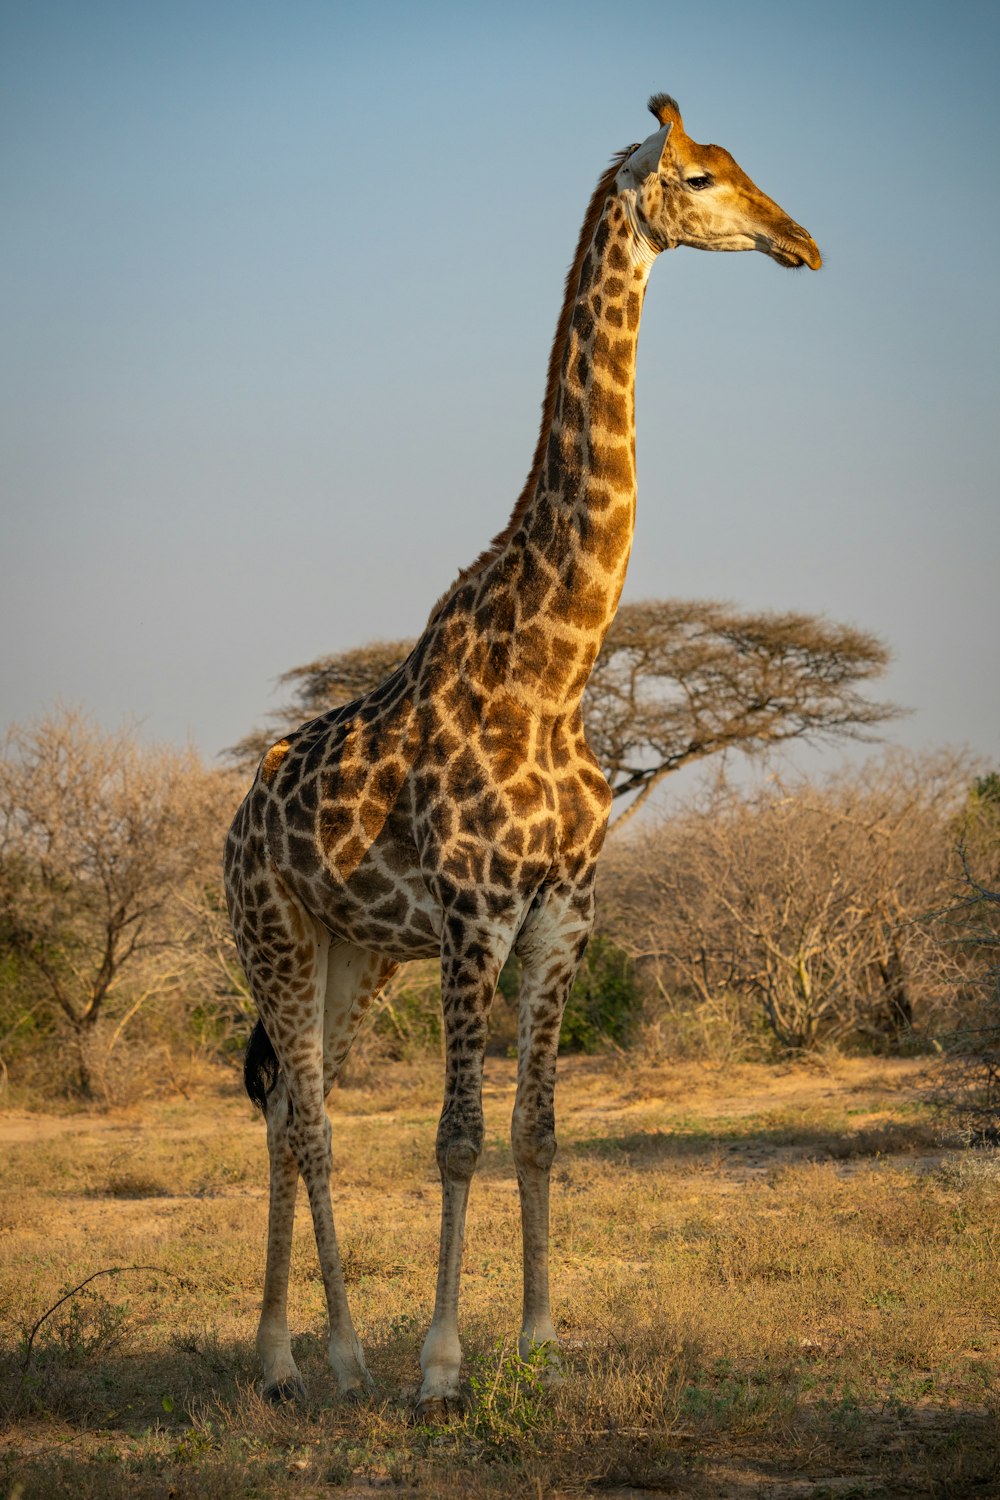 a giraffe standing in a field with trees in the background